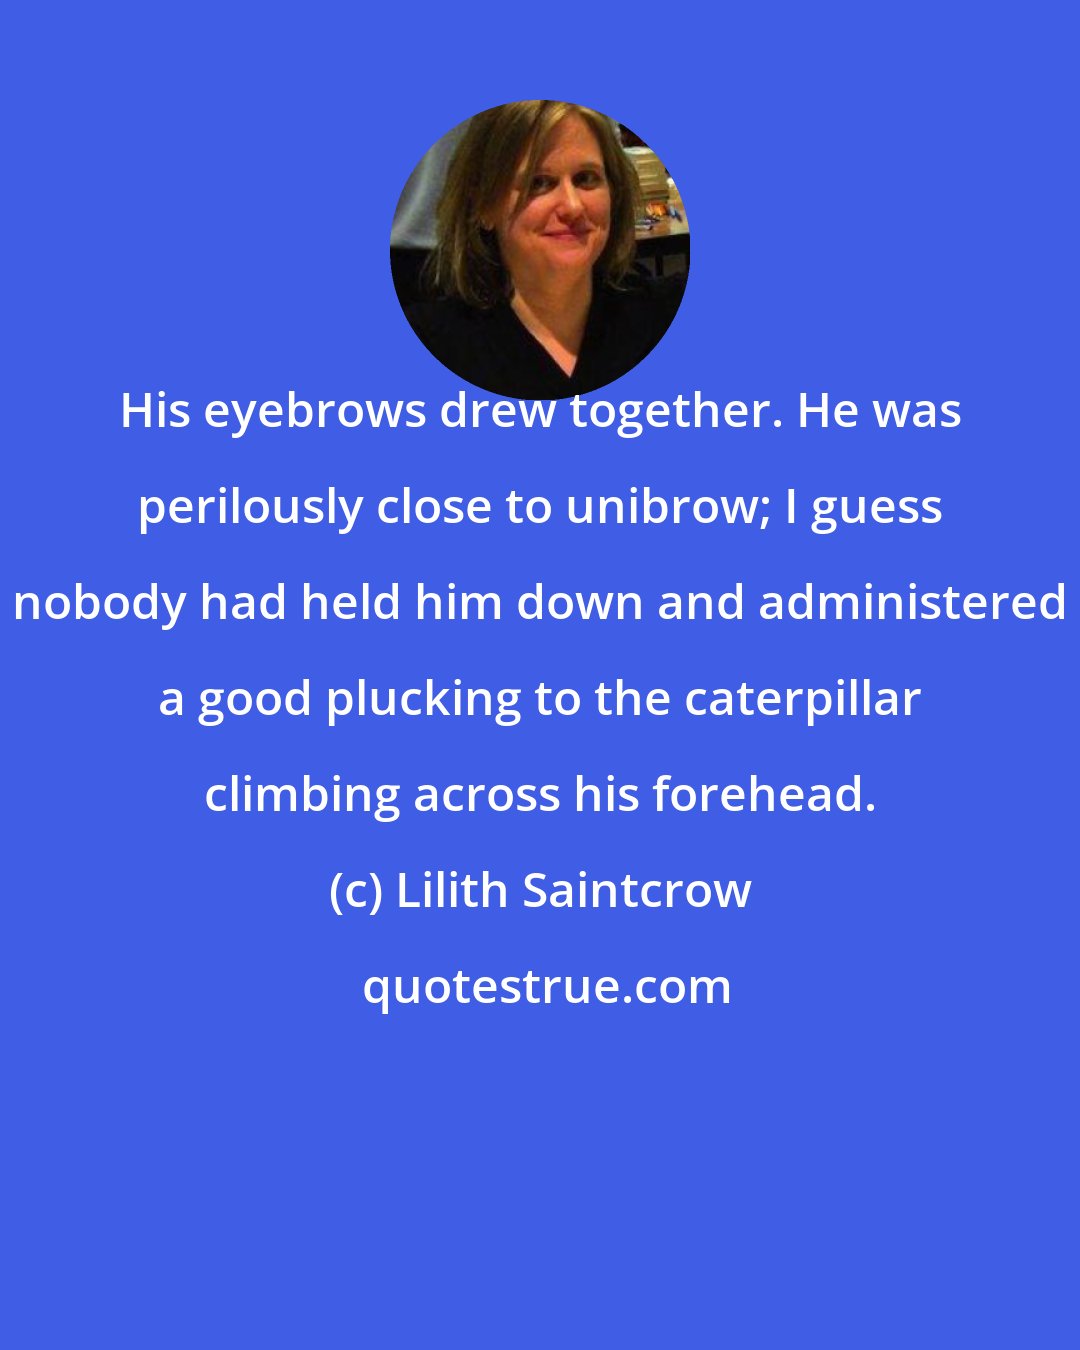 Lilith Saintcrow: His eyebrows drew together. He was perilously close to unibrow; I guess nobody had held him down and administered a good plucking to the caterpillar climbing across his forehead.